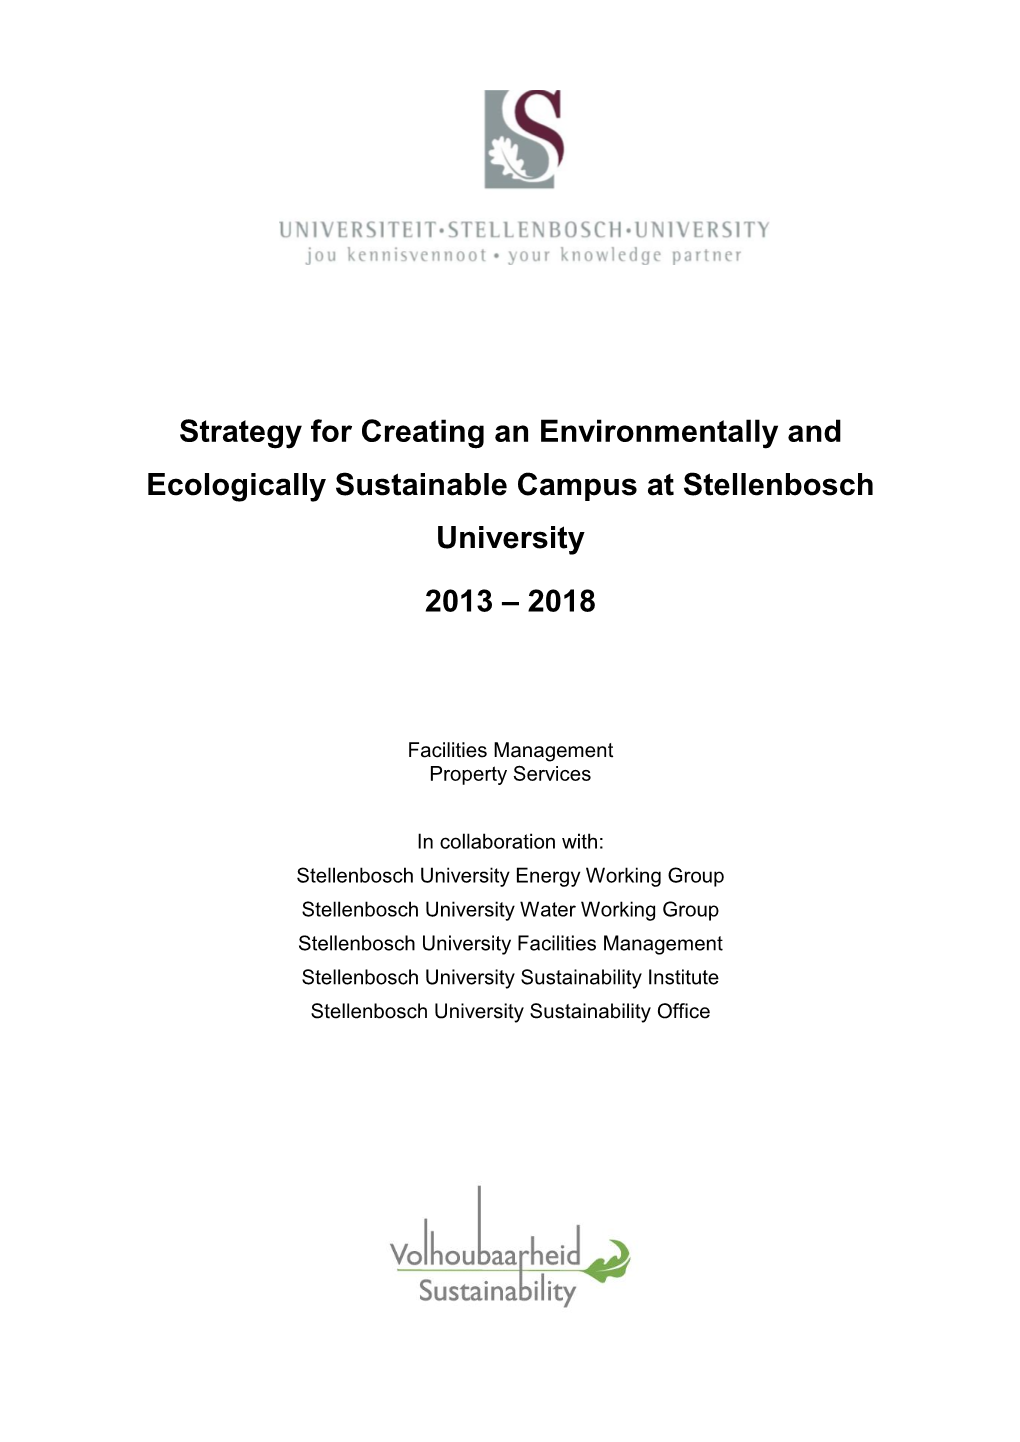 Strategy for Creating an Environmentally and Ecologically Sustainable Campus at Stellenbosch University